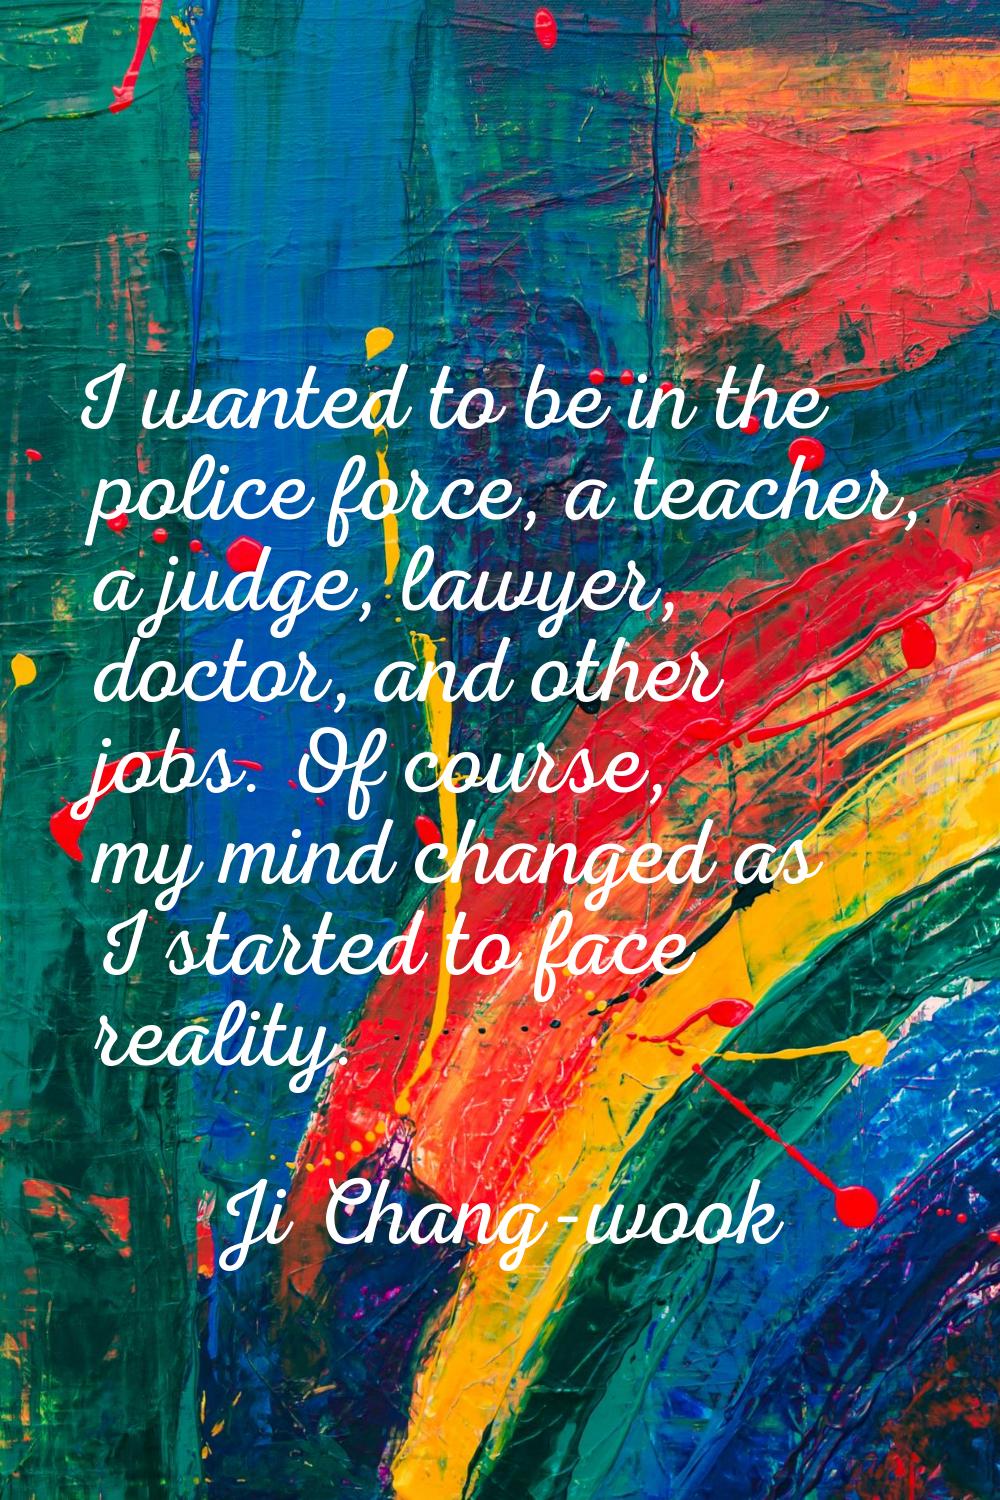 I wanted to be in the police force, a teacher, a judge, lawyer, doctor, and other jobs. Of course, 